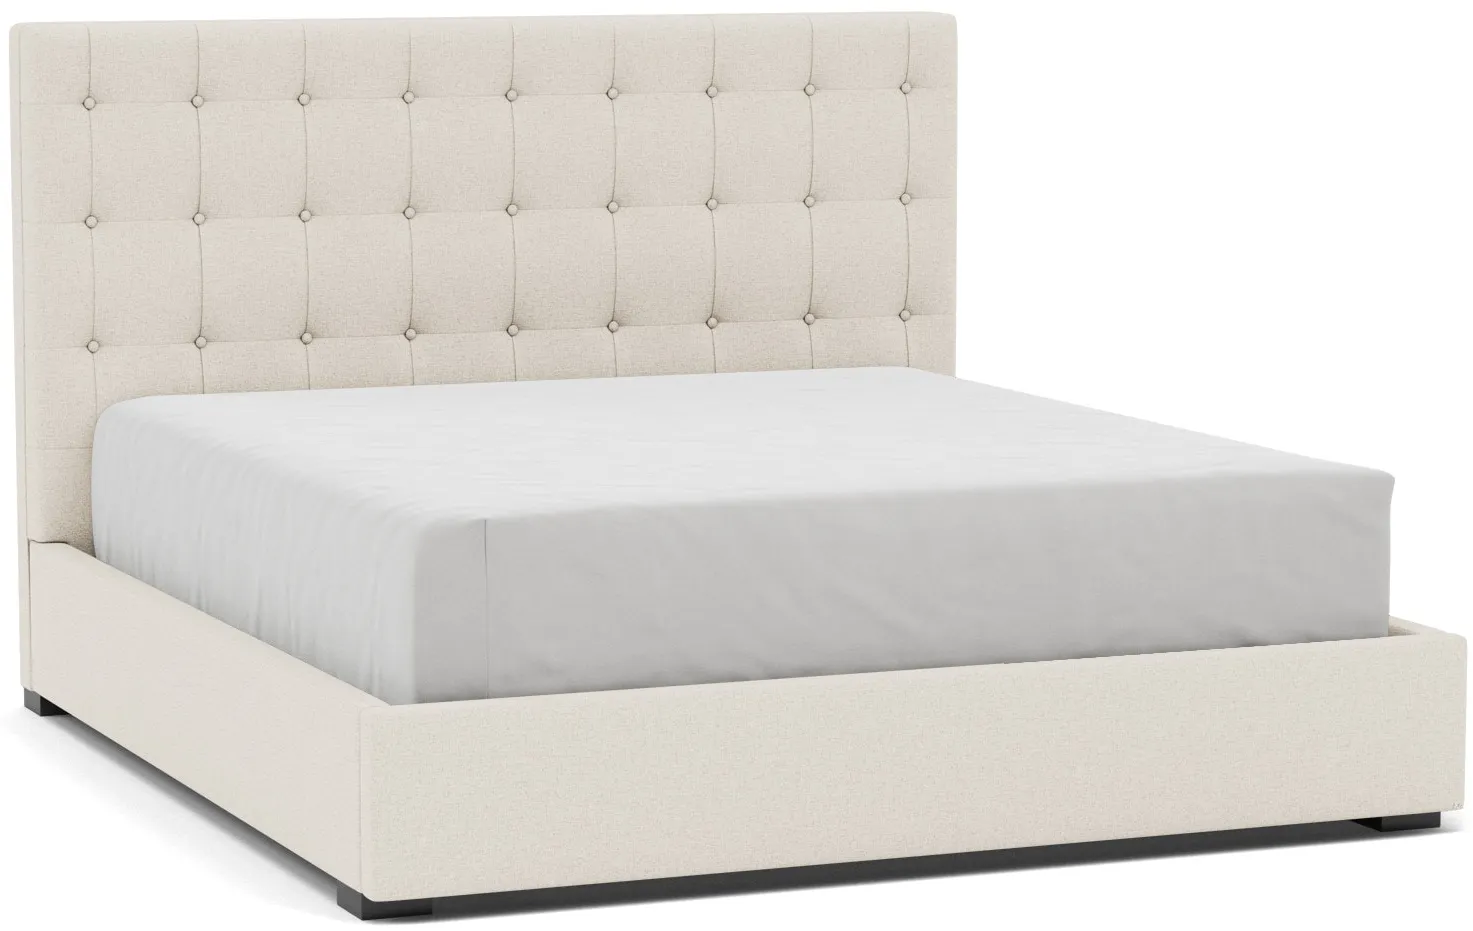 Abby King Upholstered Bed in Merit Pearl